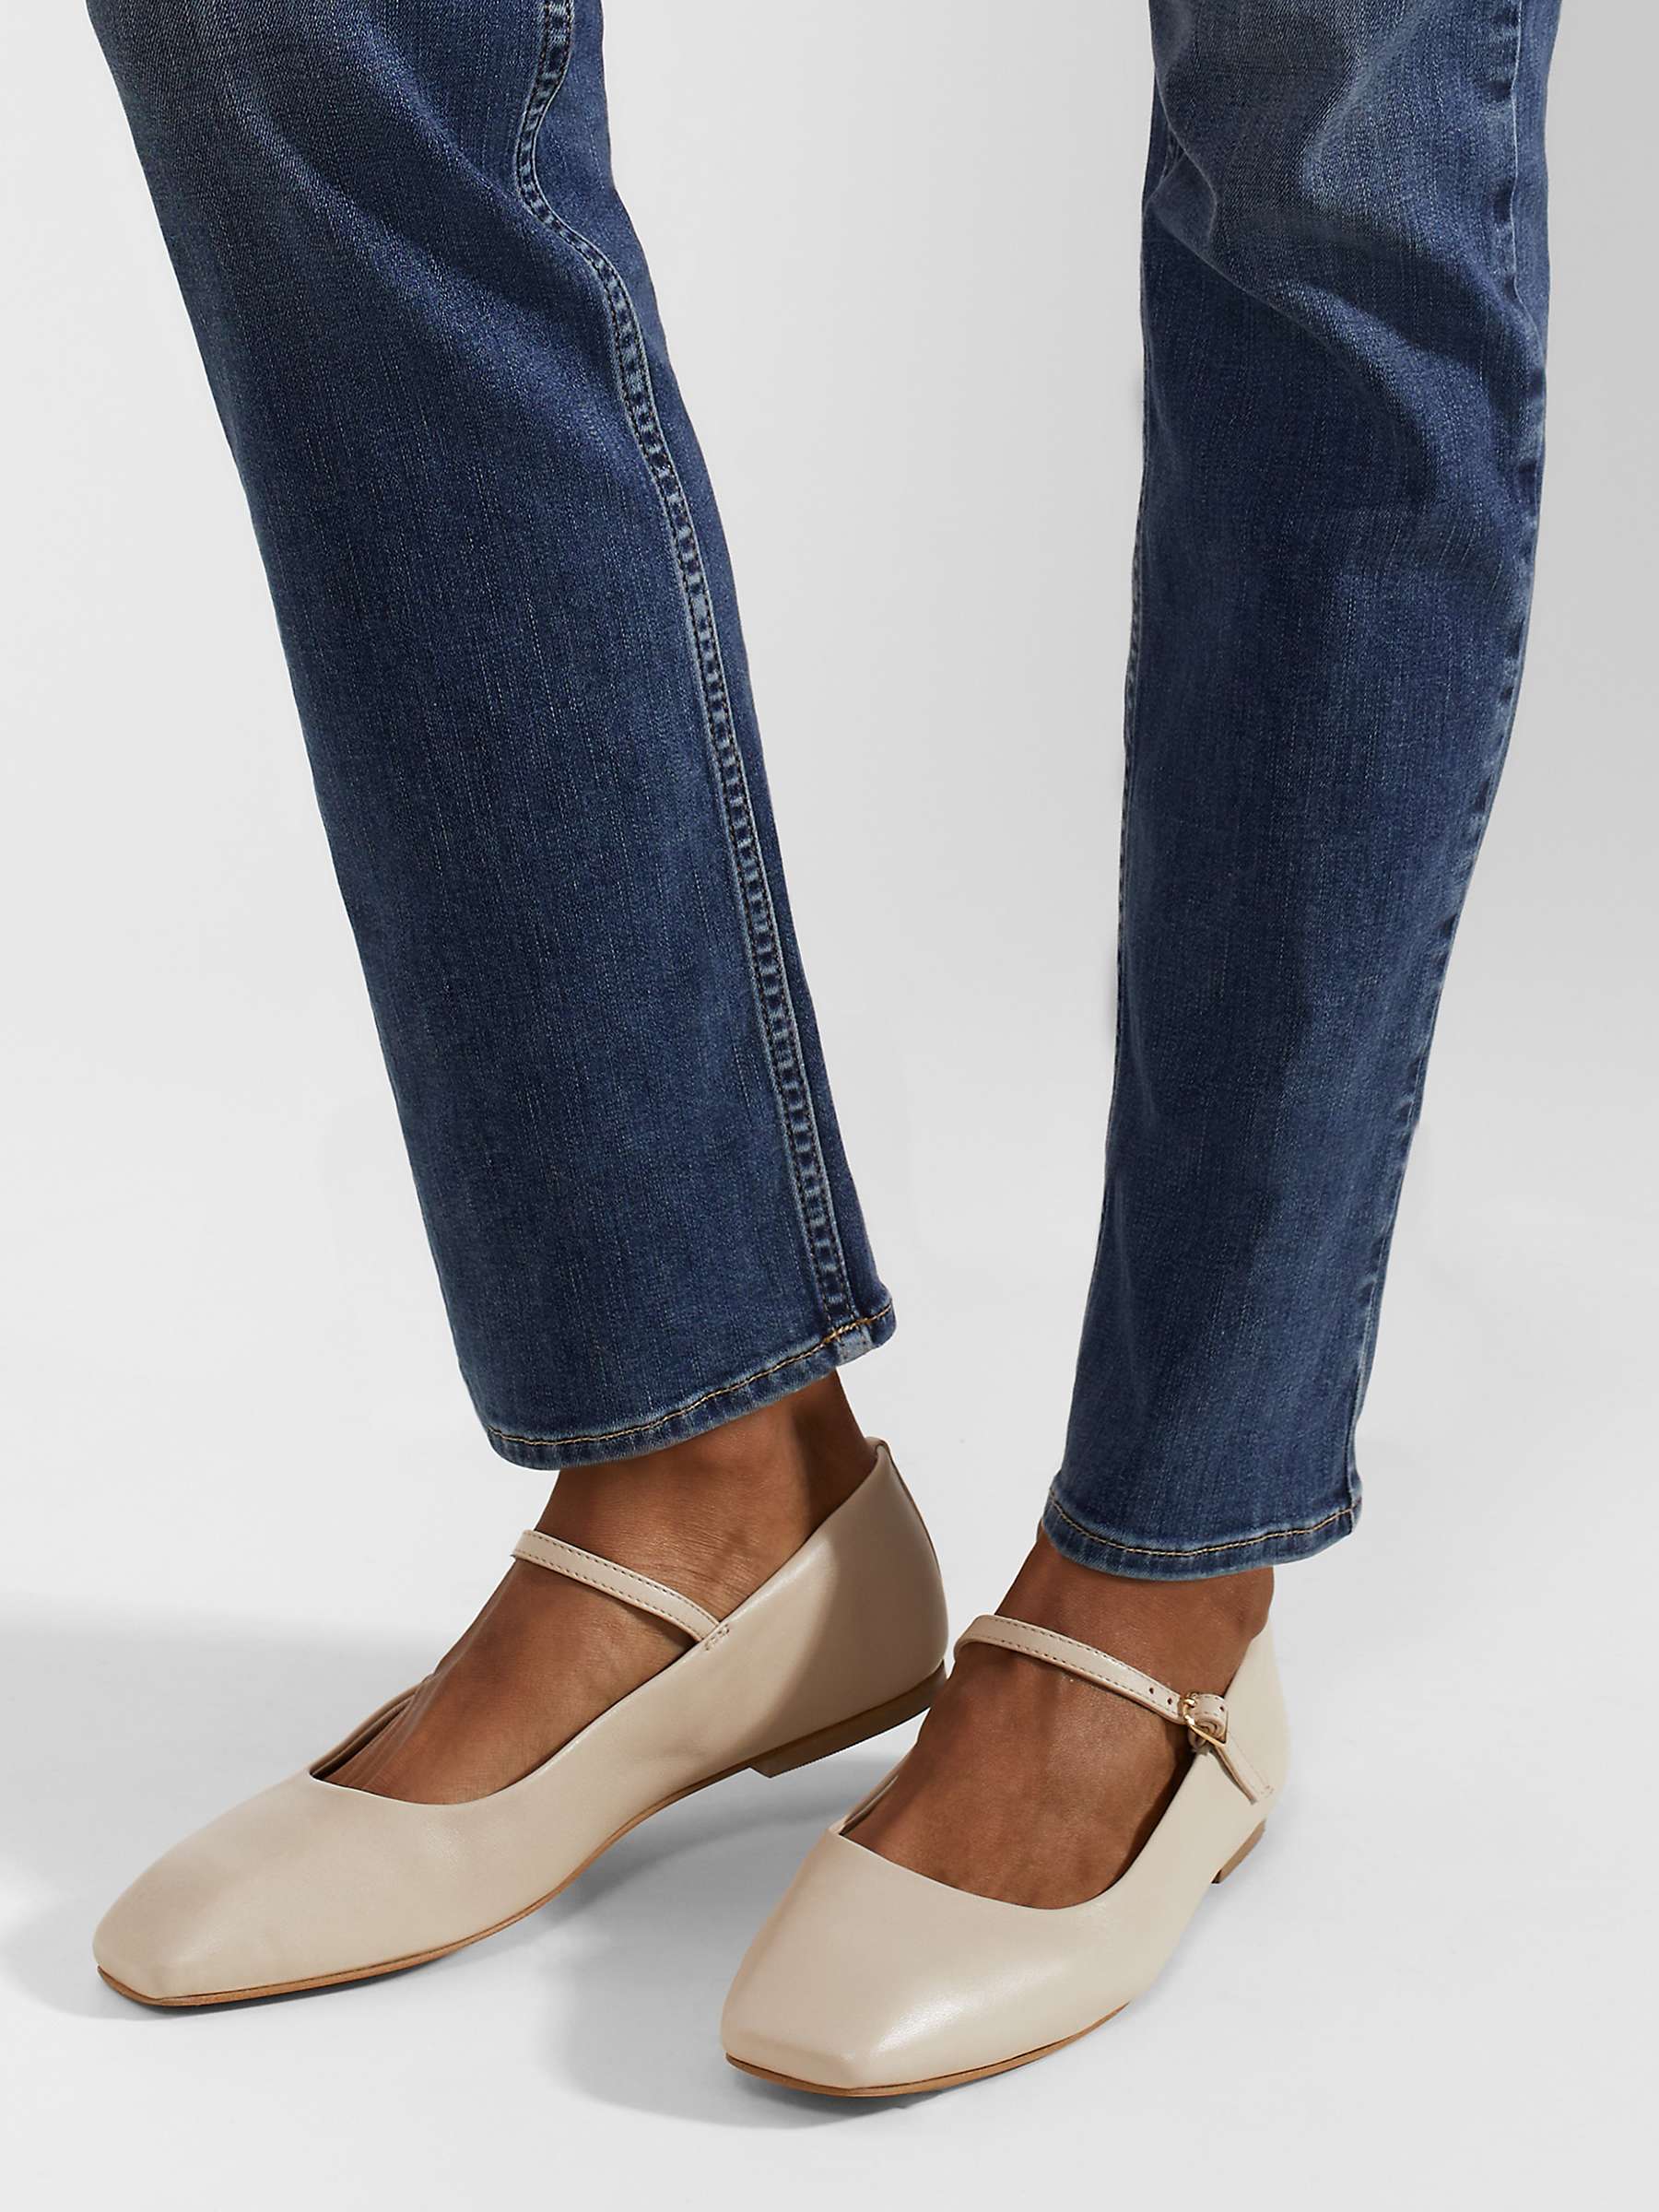 Buy Hobbs Chrissy Mary Jane Leather Shoes, Light Beige Online at johnlewis.com